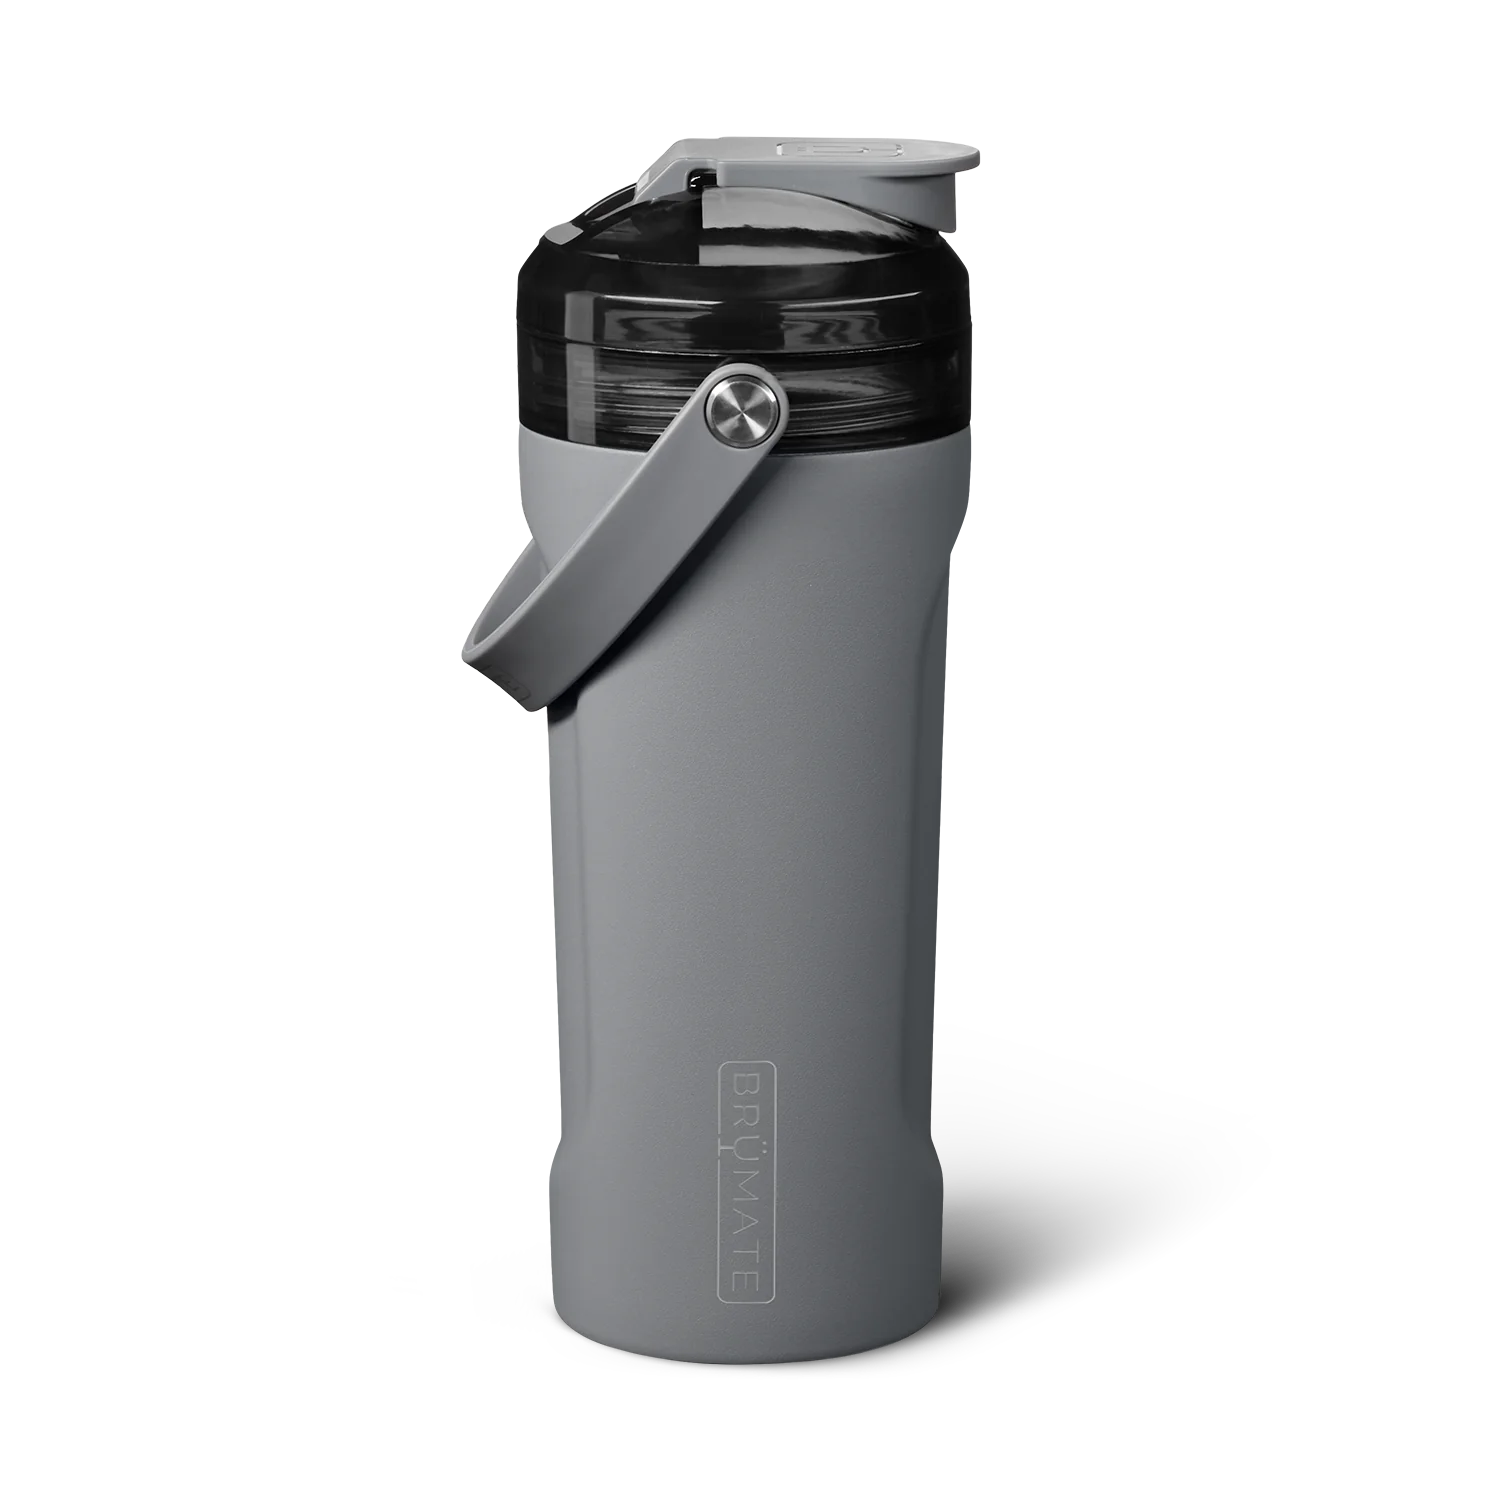 The MultiShaker is made for elevating your fitness journey. Our built-in patent-pending agitator blends your shakes, greens, and powders without any clumps, while also serving as a water infuser for herbs and fruits. It includes our BevGuard™ insulation to keep ice for 24+ hours, a spill-proof MagFlip™ lid, volume markings on the inside, a durable silicone handle, a non-slip base, and the ability to interchange tops with our MÜV or Straw Lids, making it perfect for any workout or adventure.(matte gray)